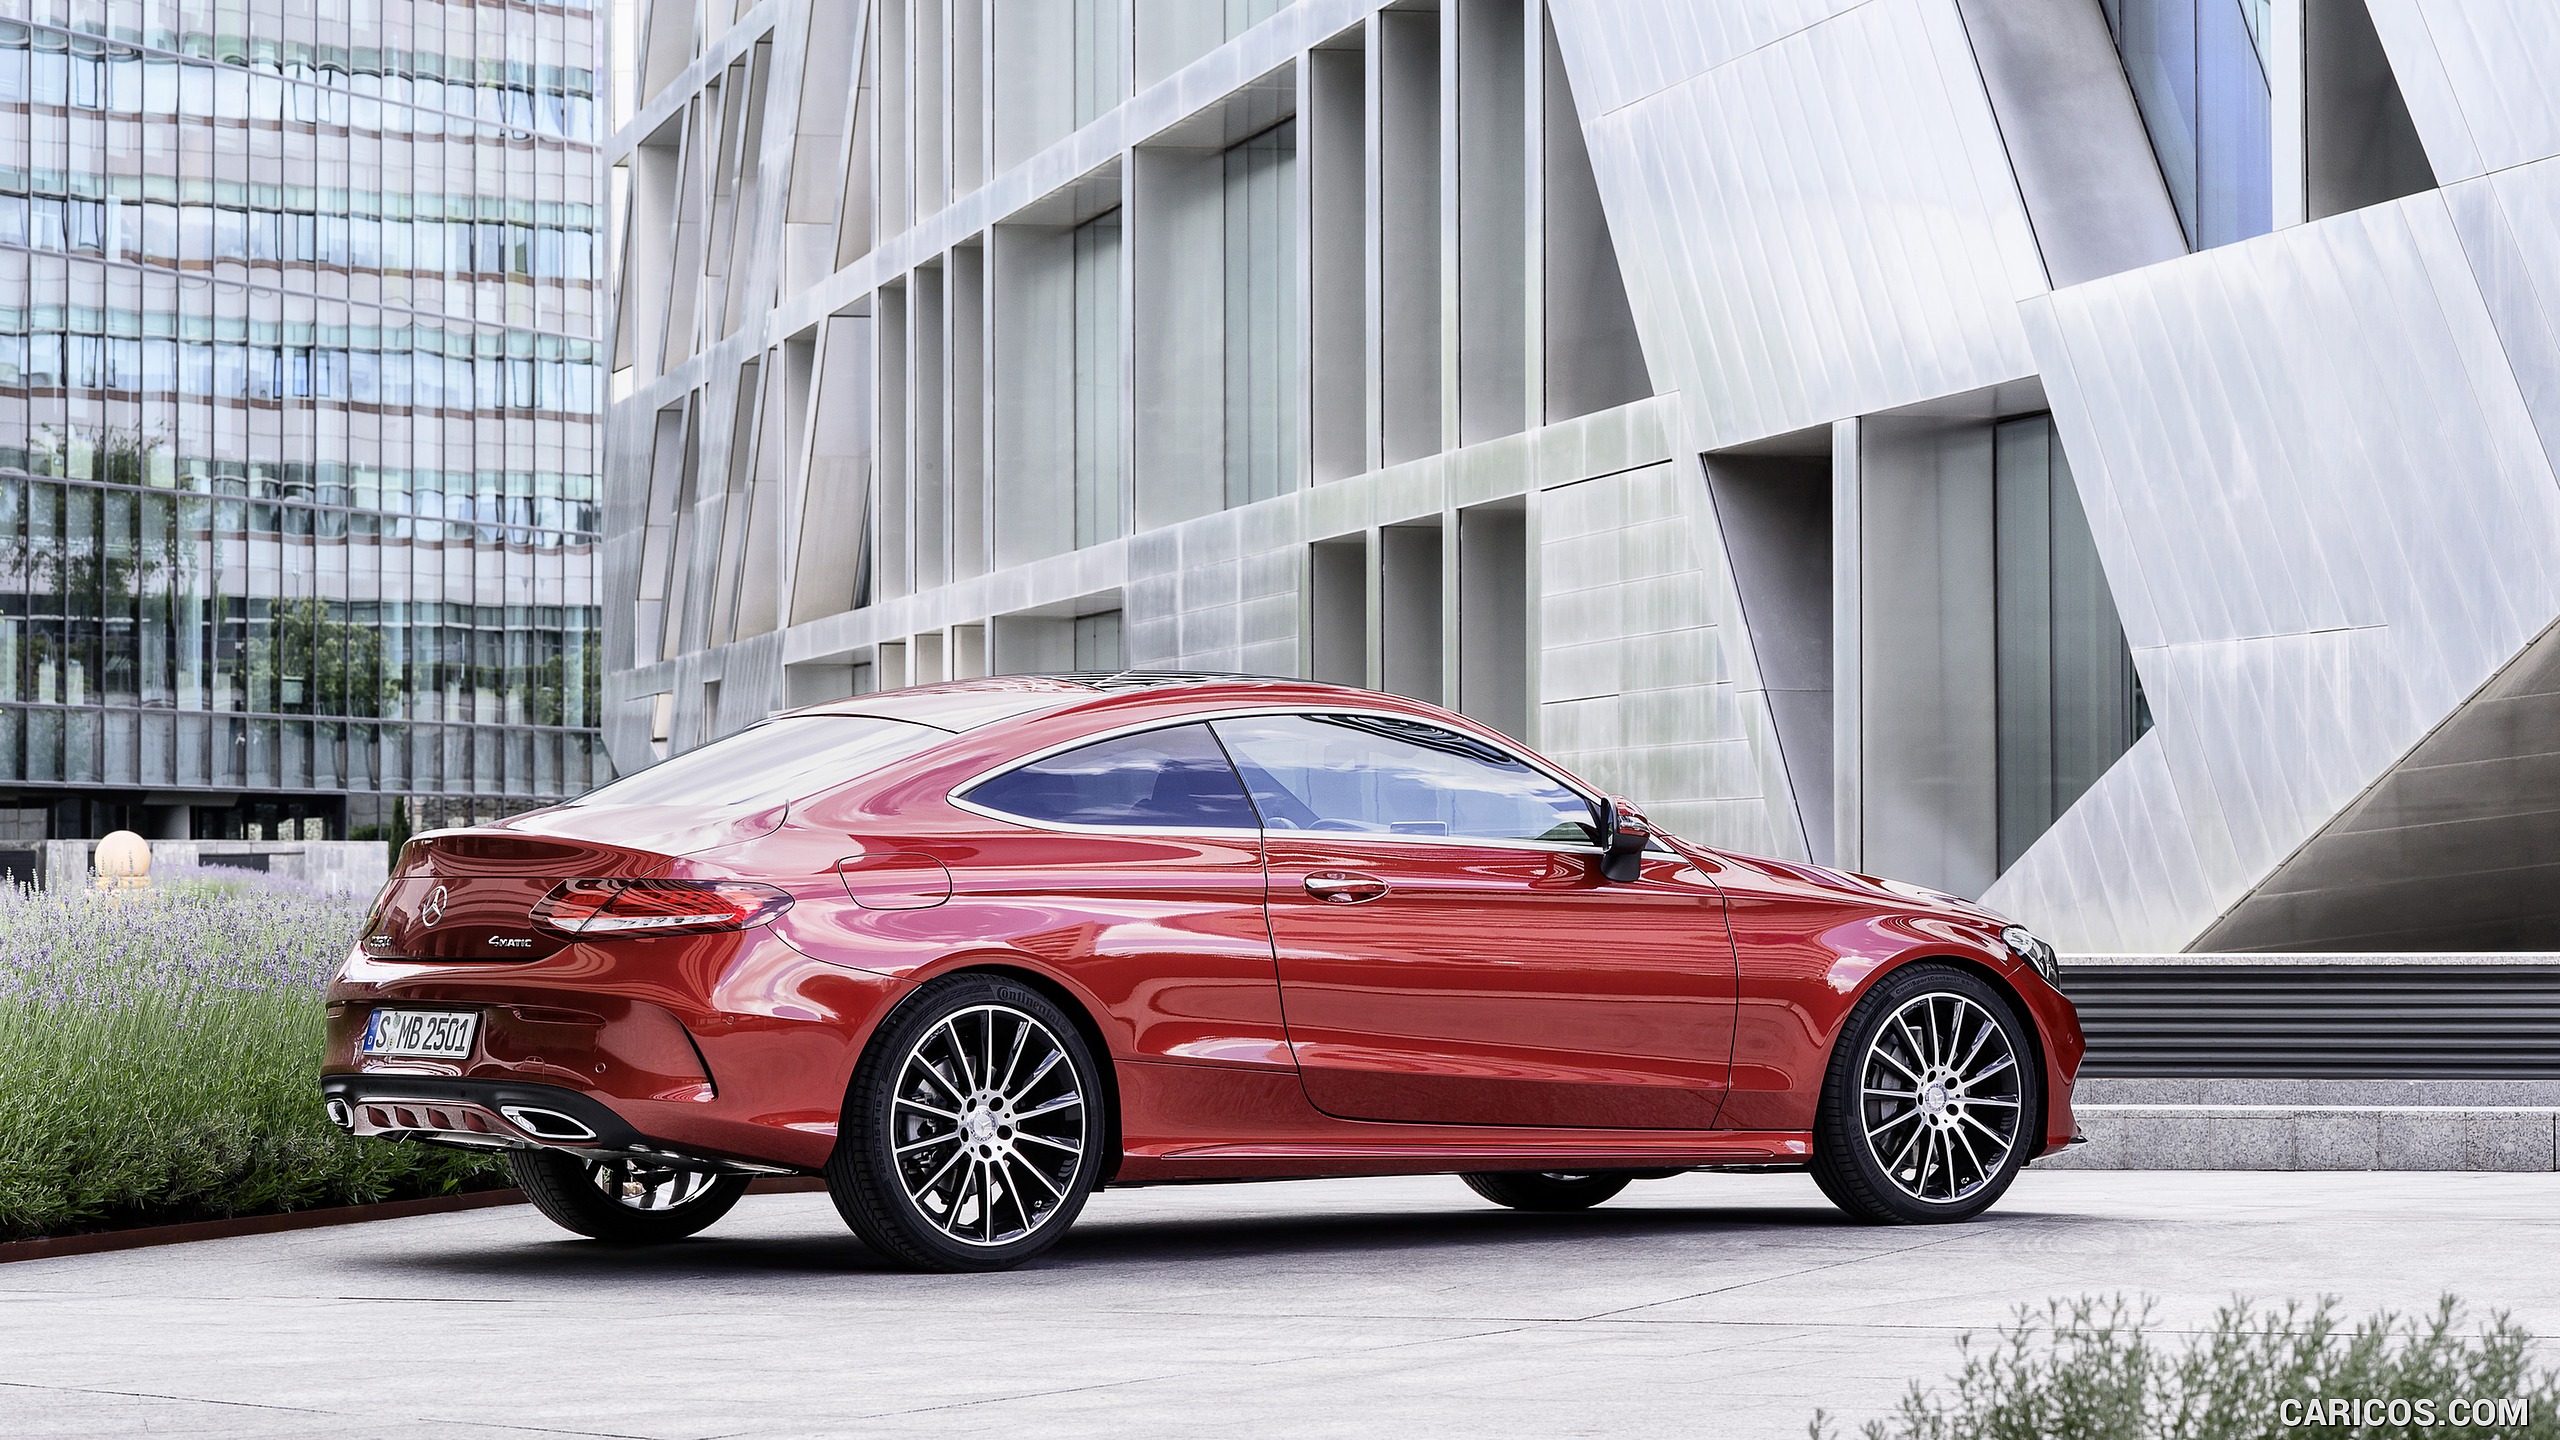 2017 Mercedes-Benz C-Class Coupe C250 d 4MATIC (Hyacinth Red) - Side, #70 of 210